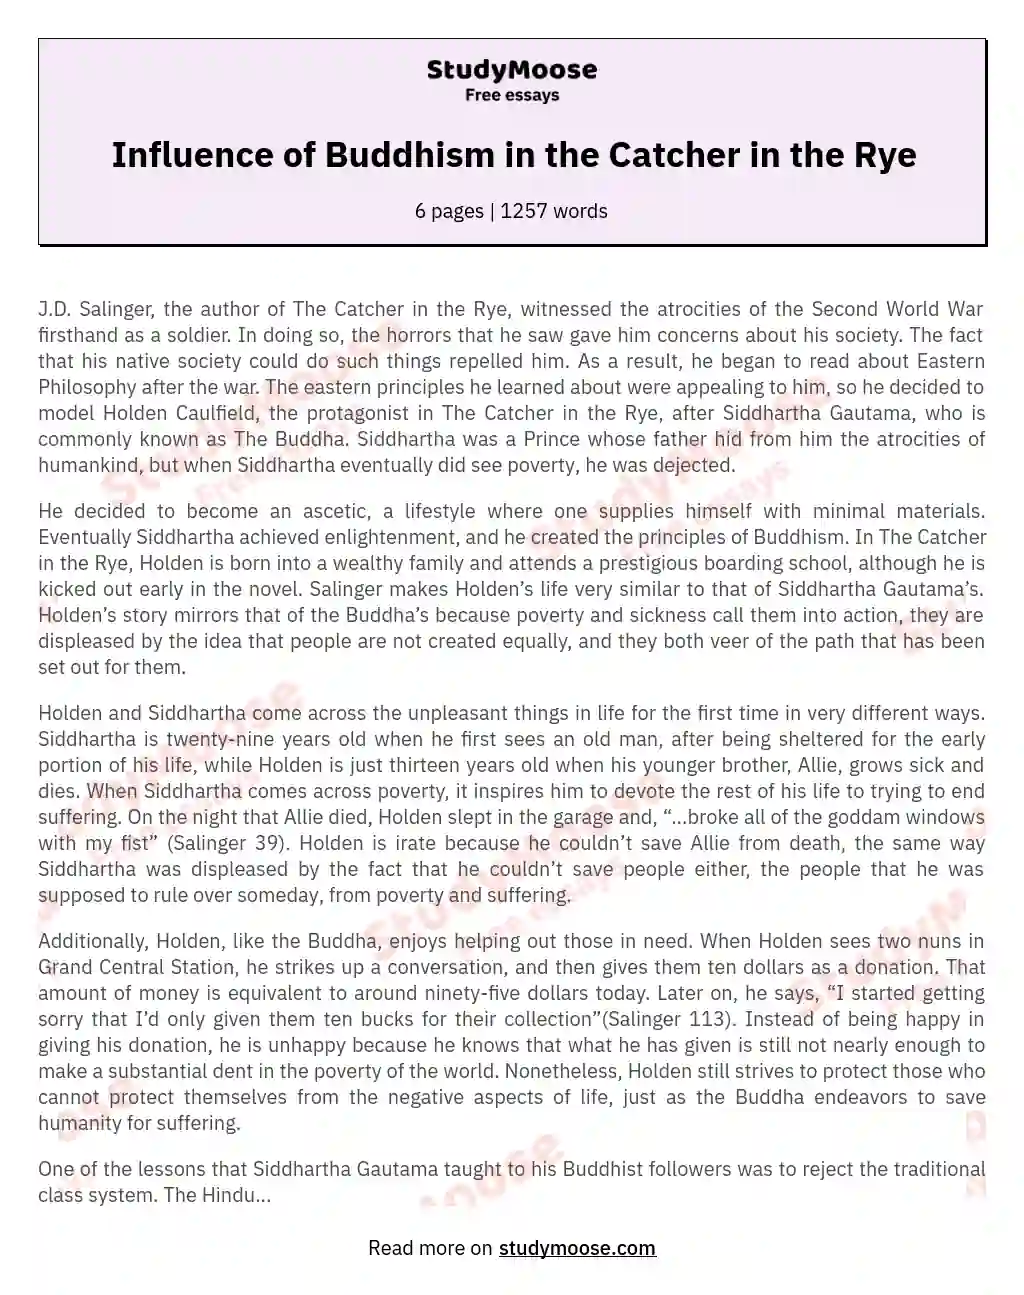 Influence of Buddhism in the Catcher in the Rye